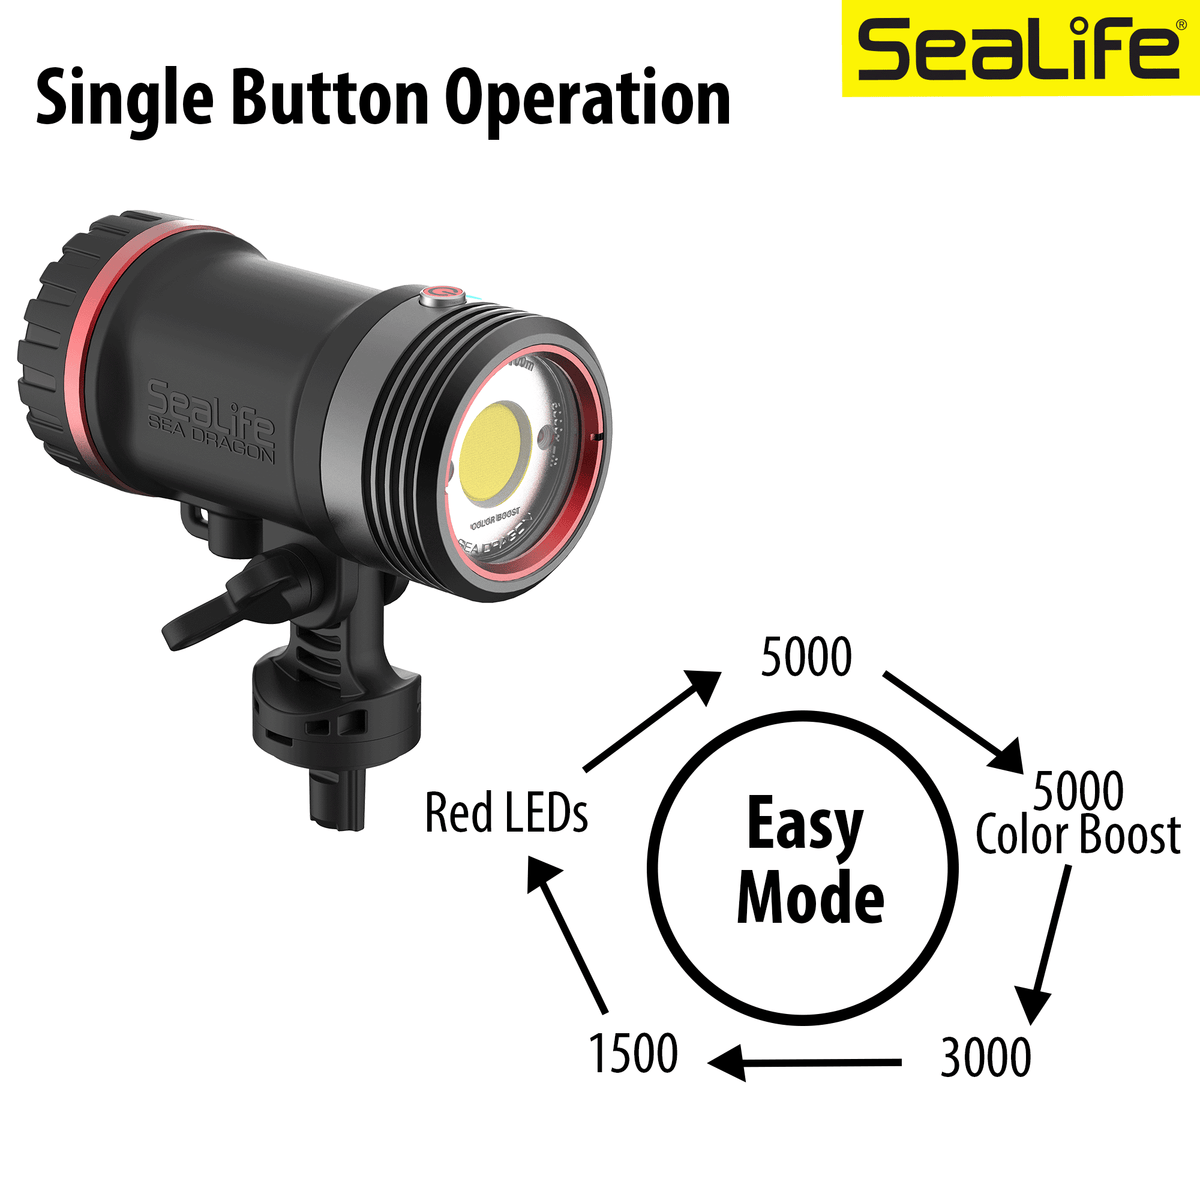 SeaDragon 5000+ with Color Boost Video Light